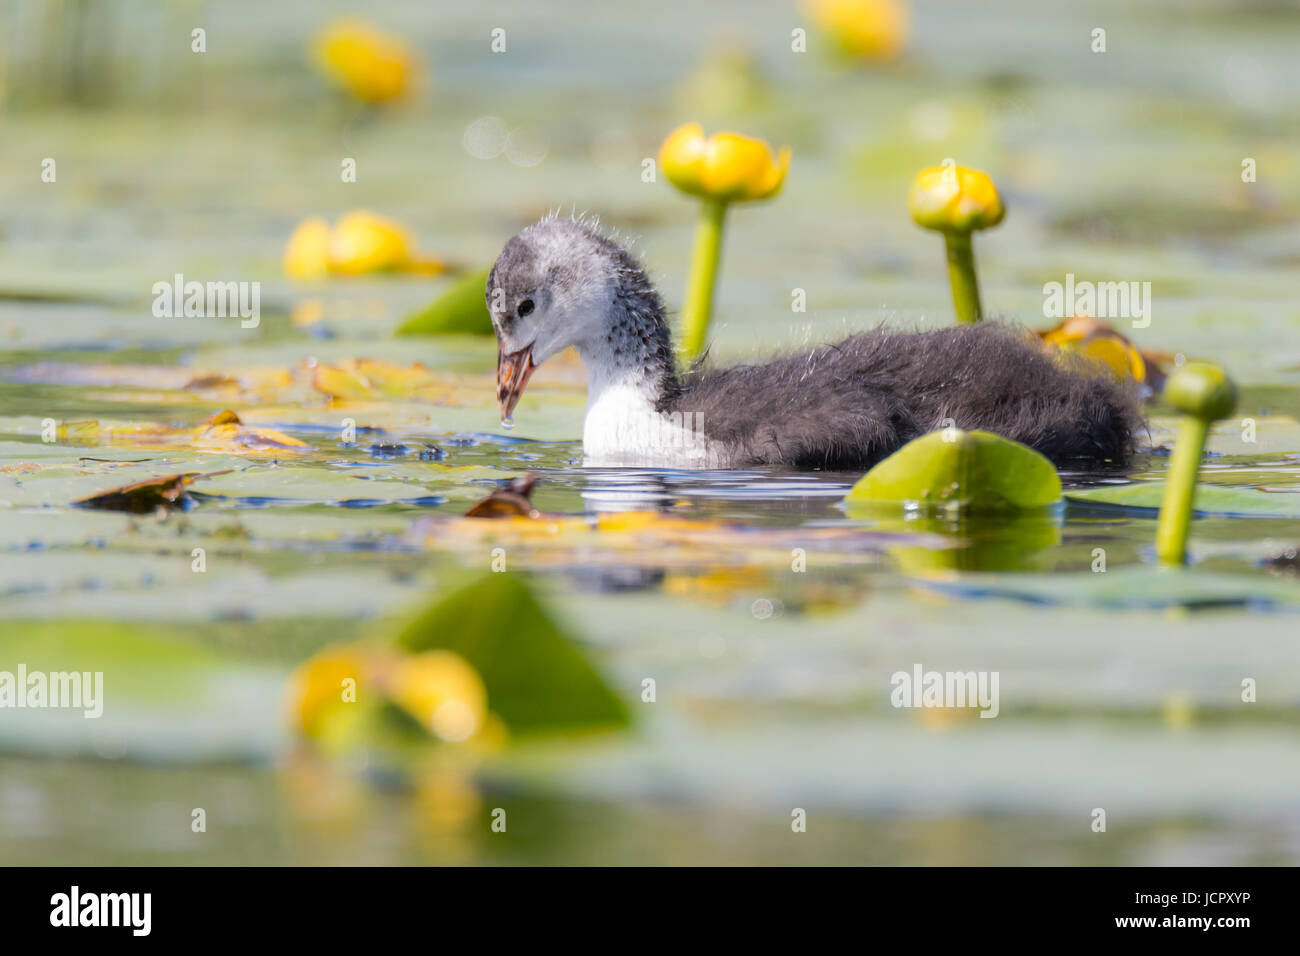 Coot (Fulica atra) chick swimming among water lilies. Young bird in the family Rallidae foraging among yellow flowers on surface of pond Stock Photo